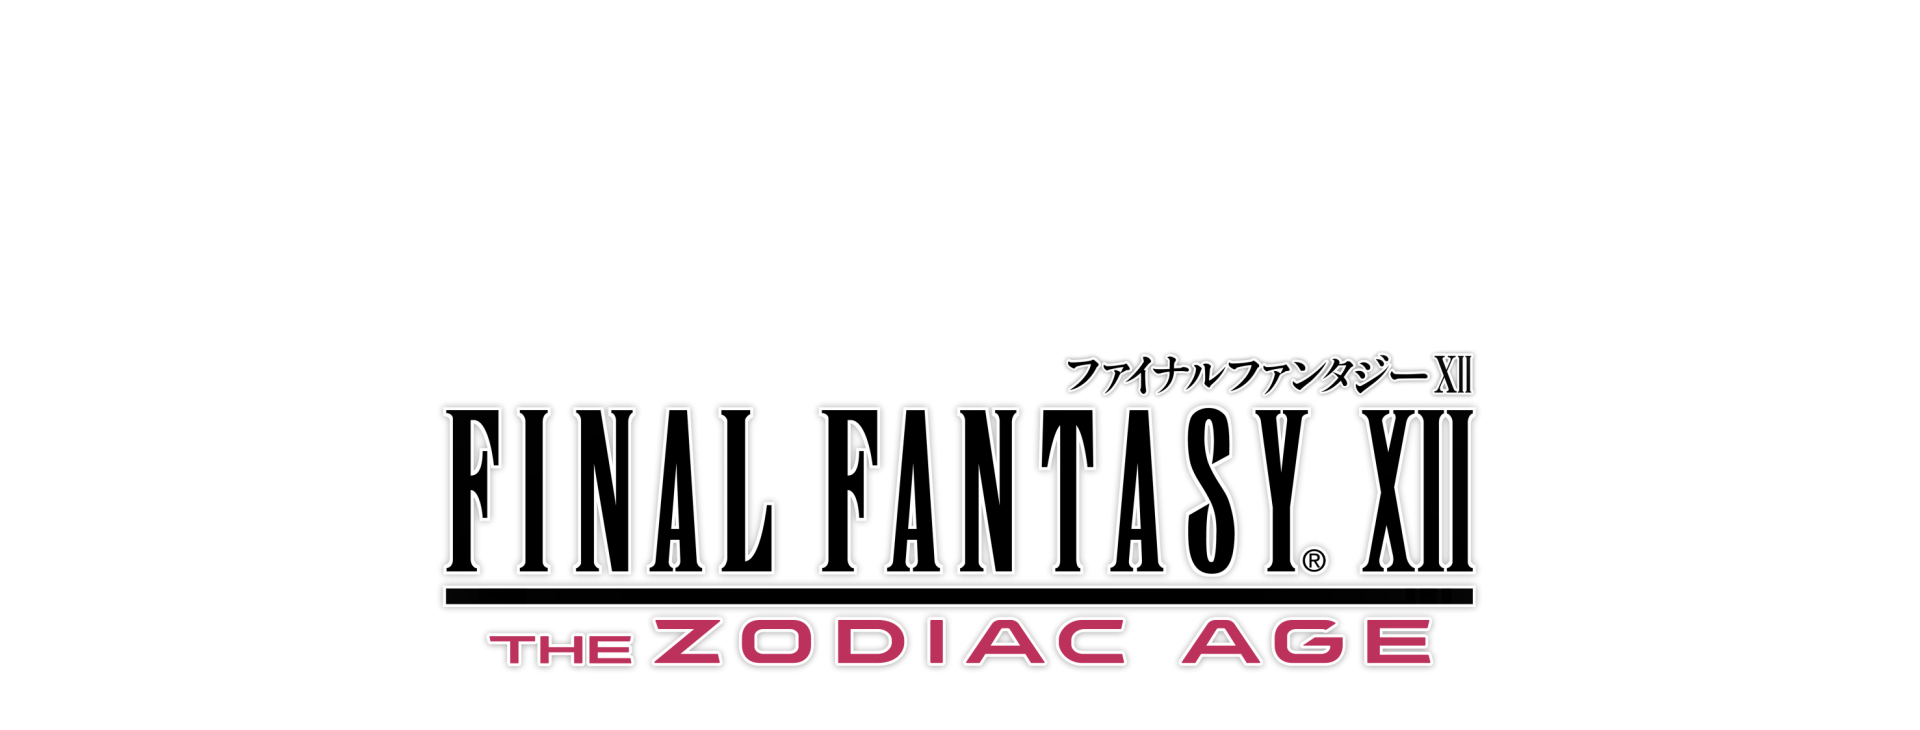 Final Fantasy Xii The Zodiac Age Hd Remaster For Ps4 17 Announced Redflagdeals Com Forums